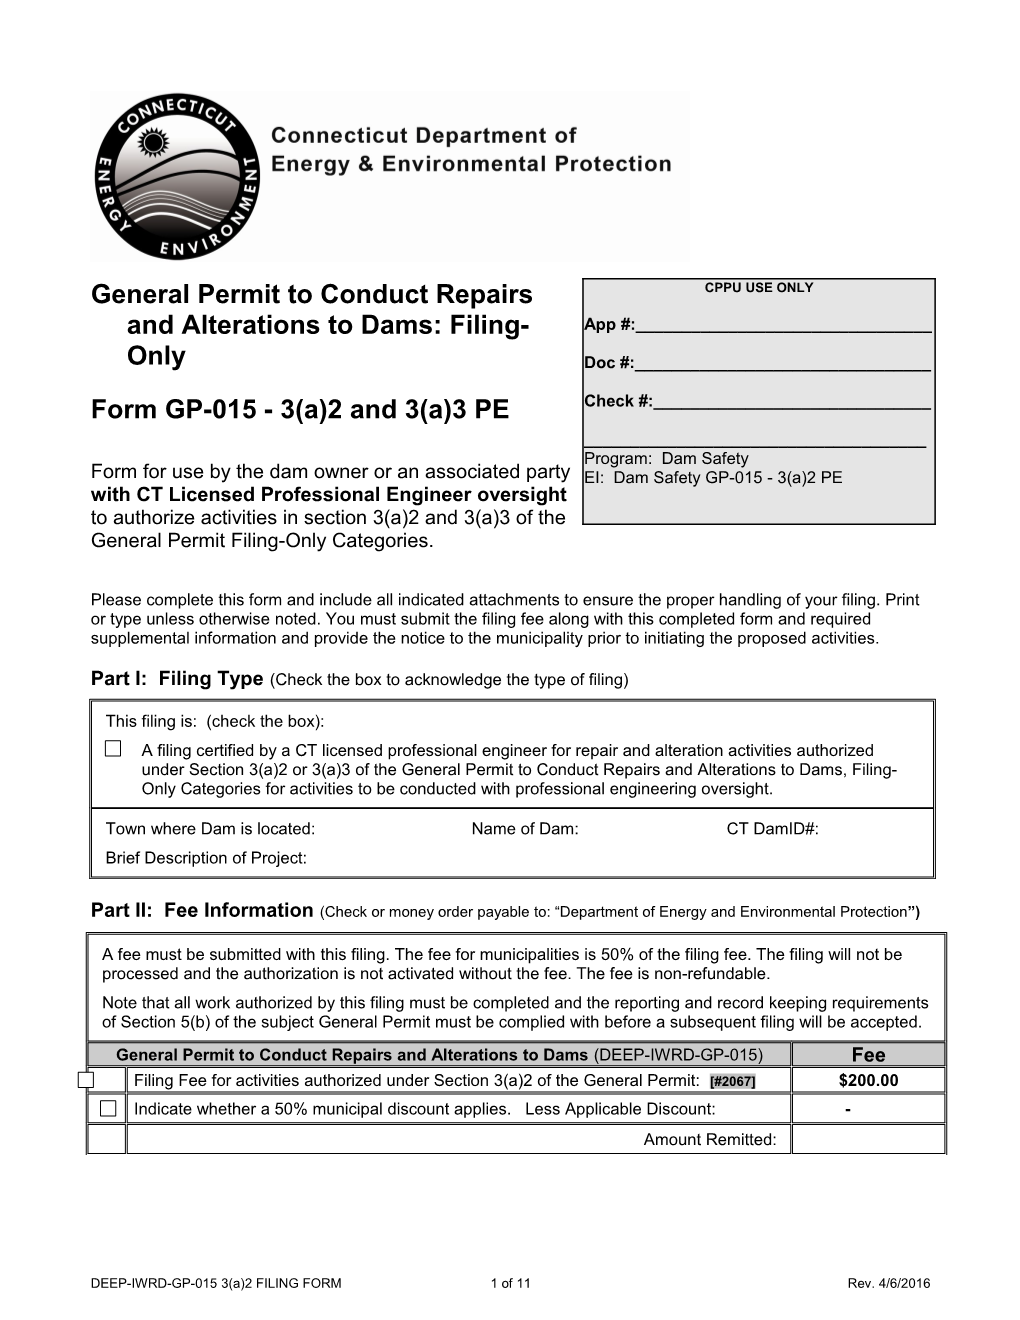 General Permit Registration Form to Conduct Repairs and Alterations to Dams GP-015-PE Required